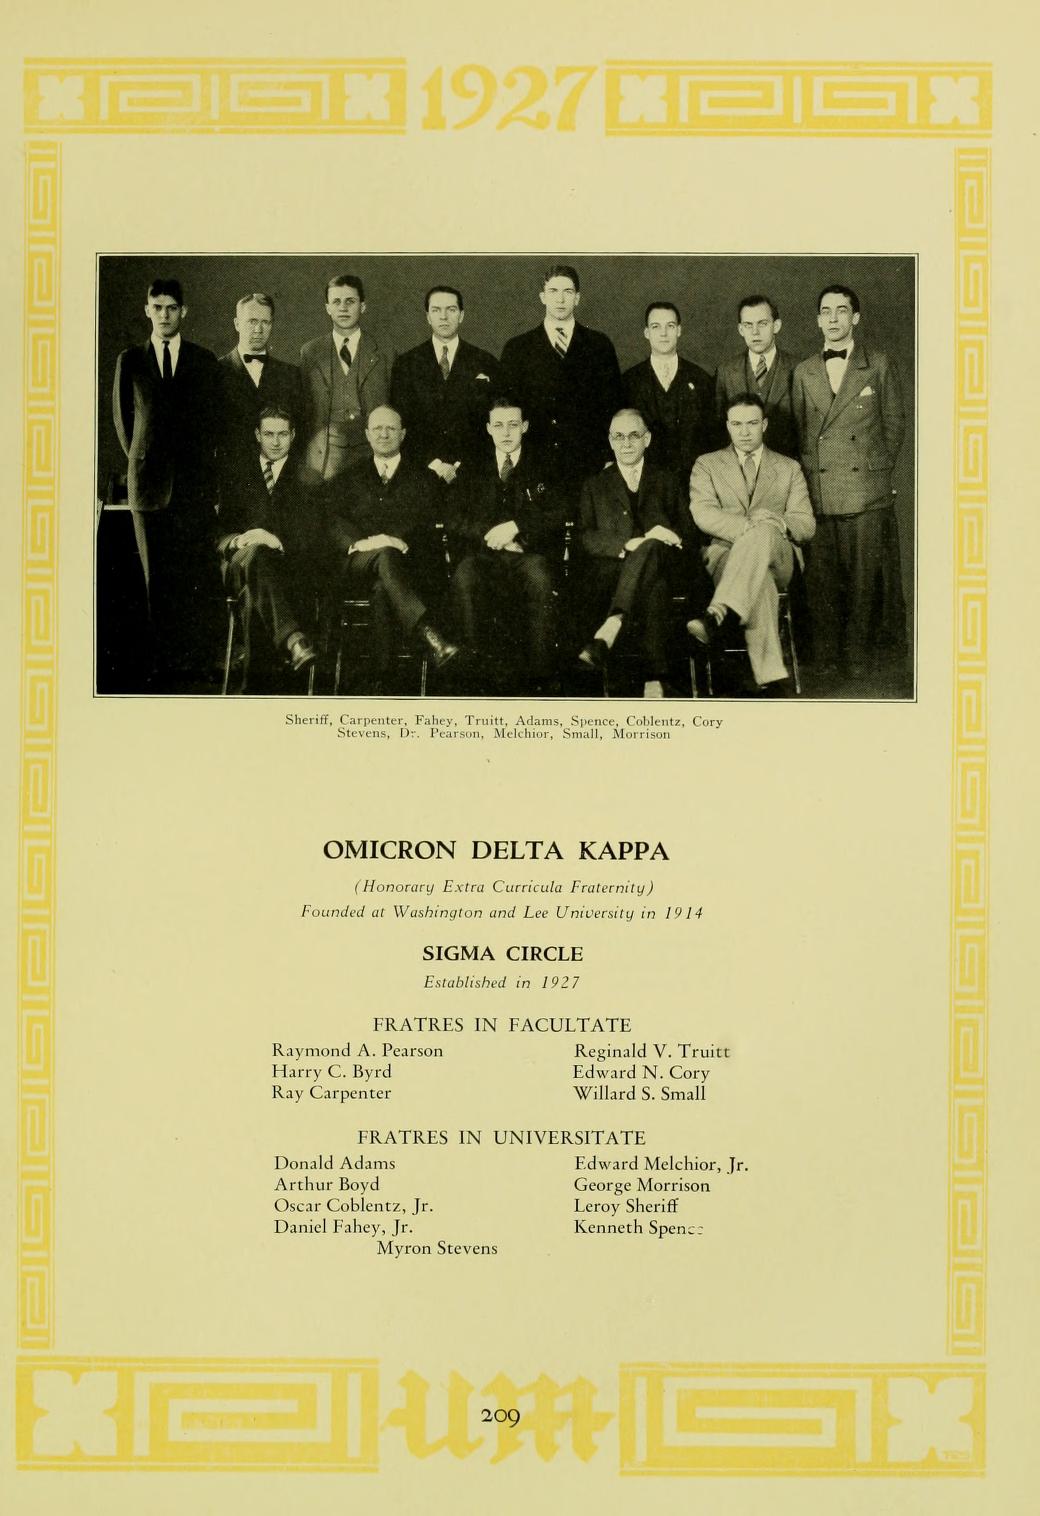 Page from the 1927 Yearbook at UMD showcasing the first image of ODK members